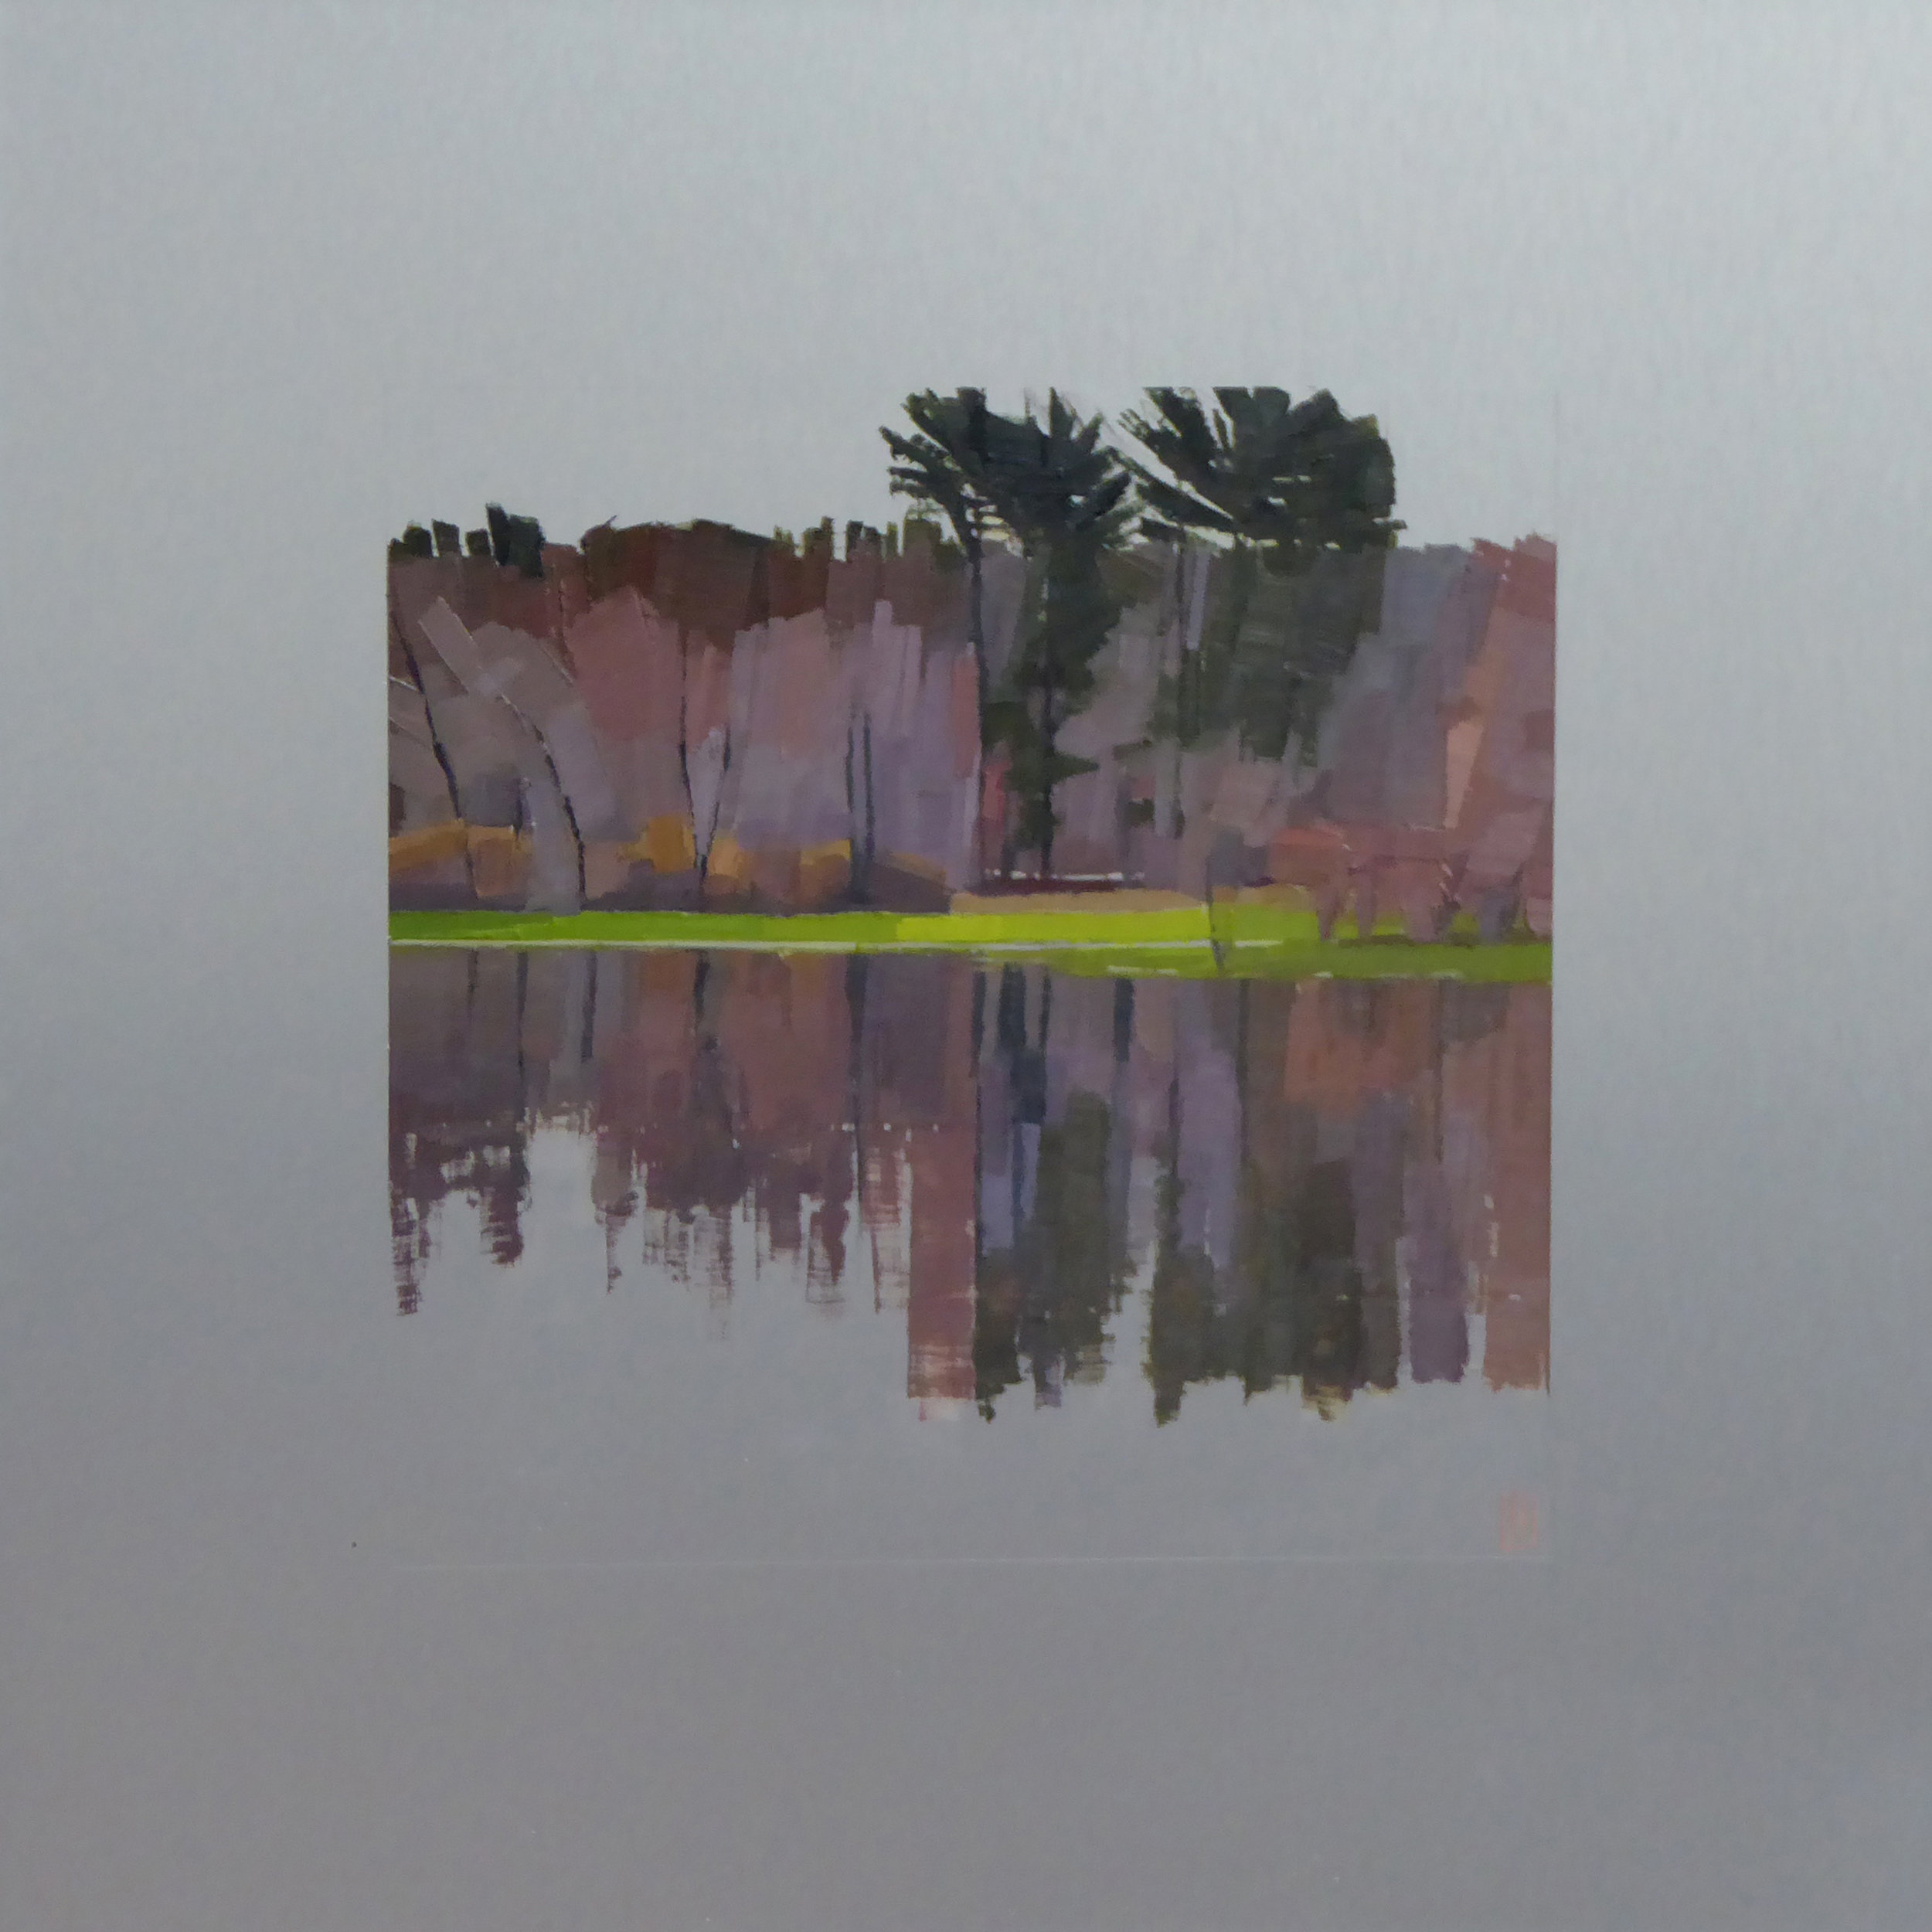   Reflect  12 x 12 oil on 20 x 20 aluminum panel  sold  Islesford Artists Gallery  